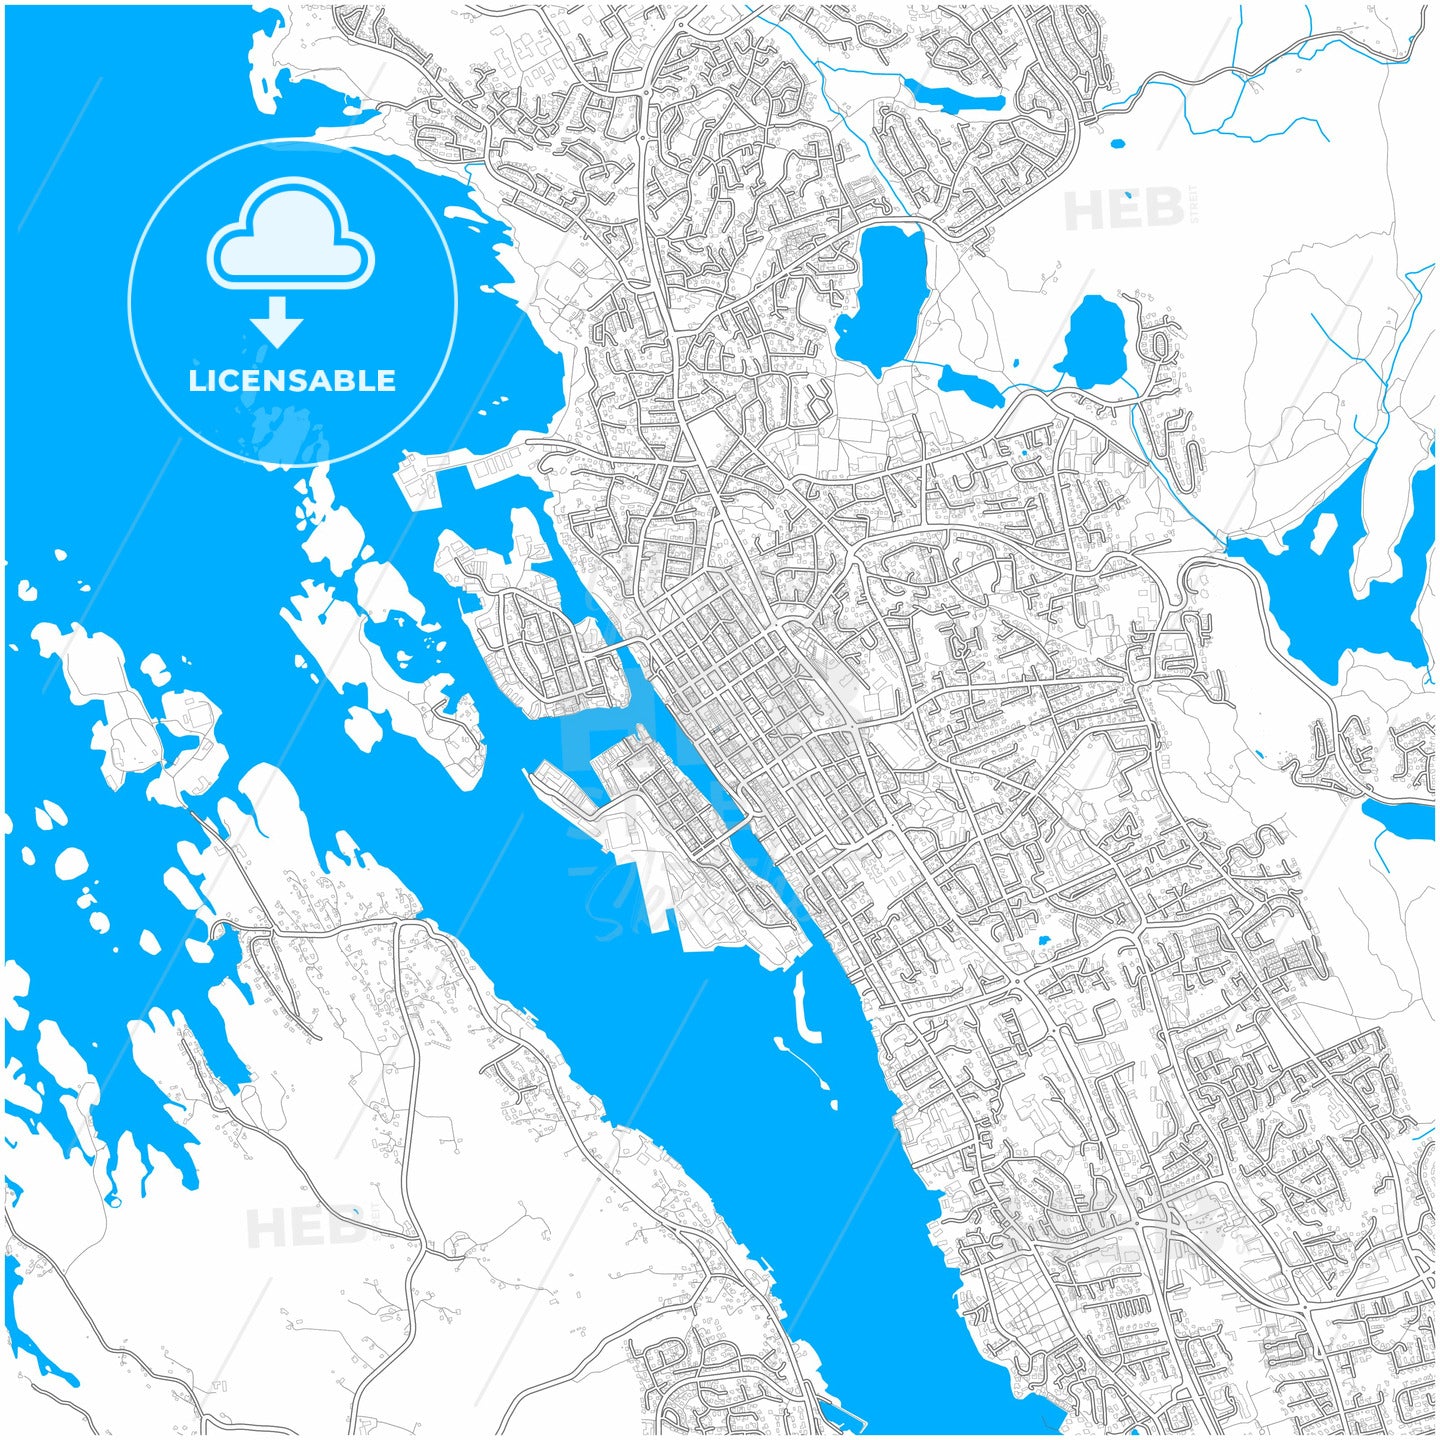 Haugesund, Rogaland, Norway, city map with high quality roads.